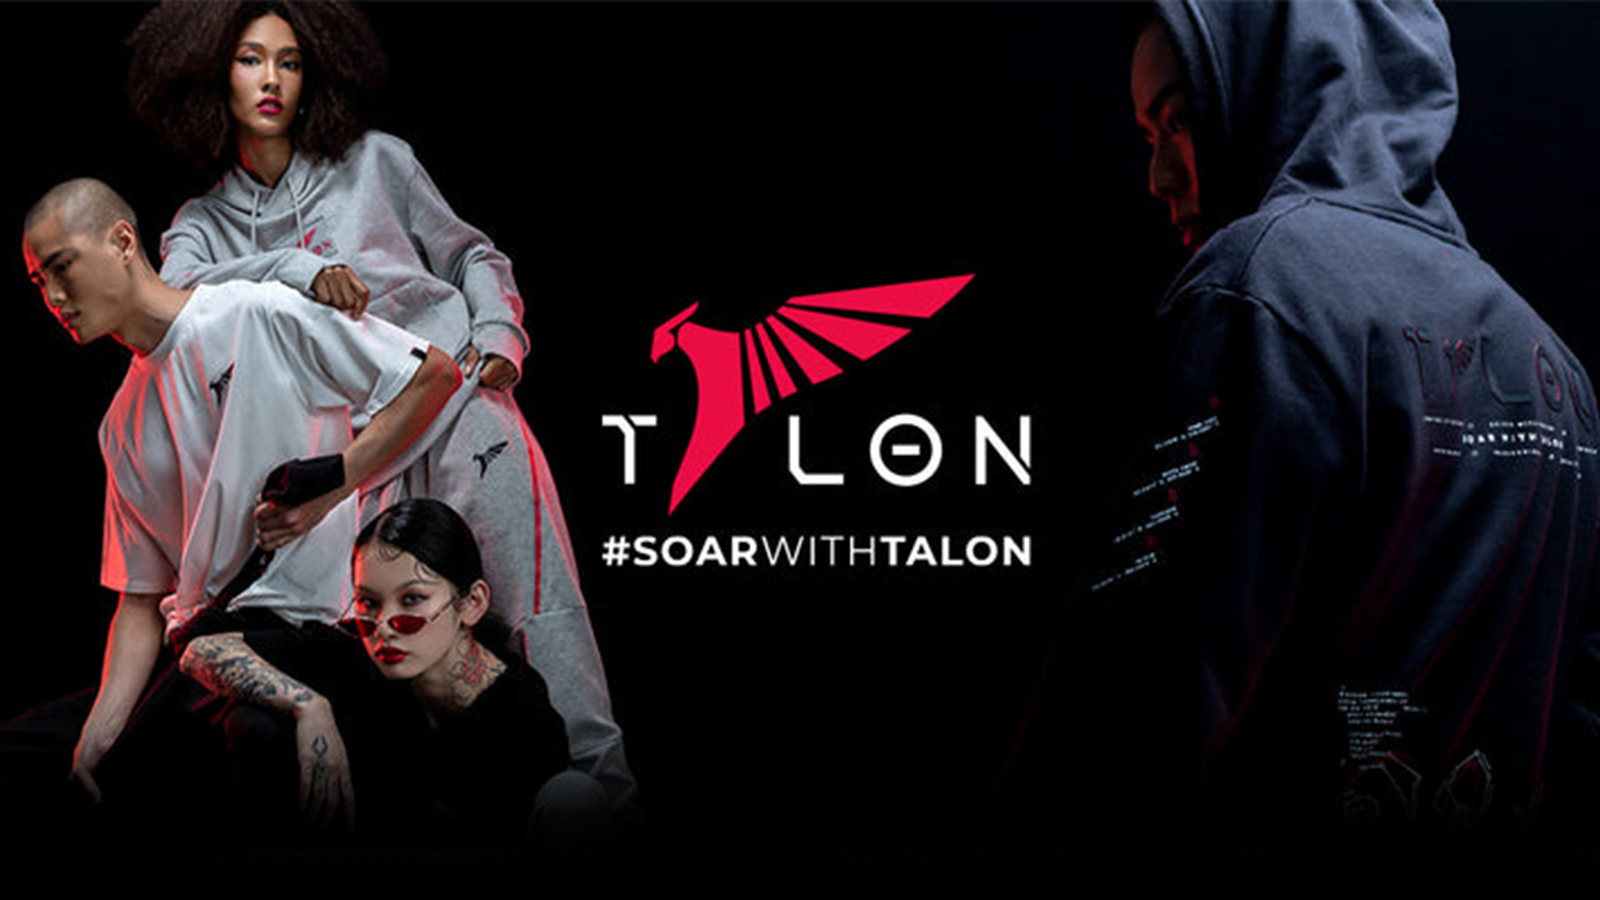 TALON LAUNCHES DEBUT APPAREL COLLECTION